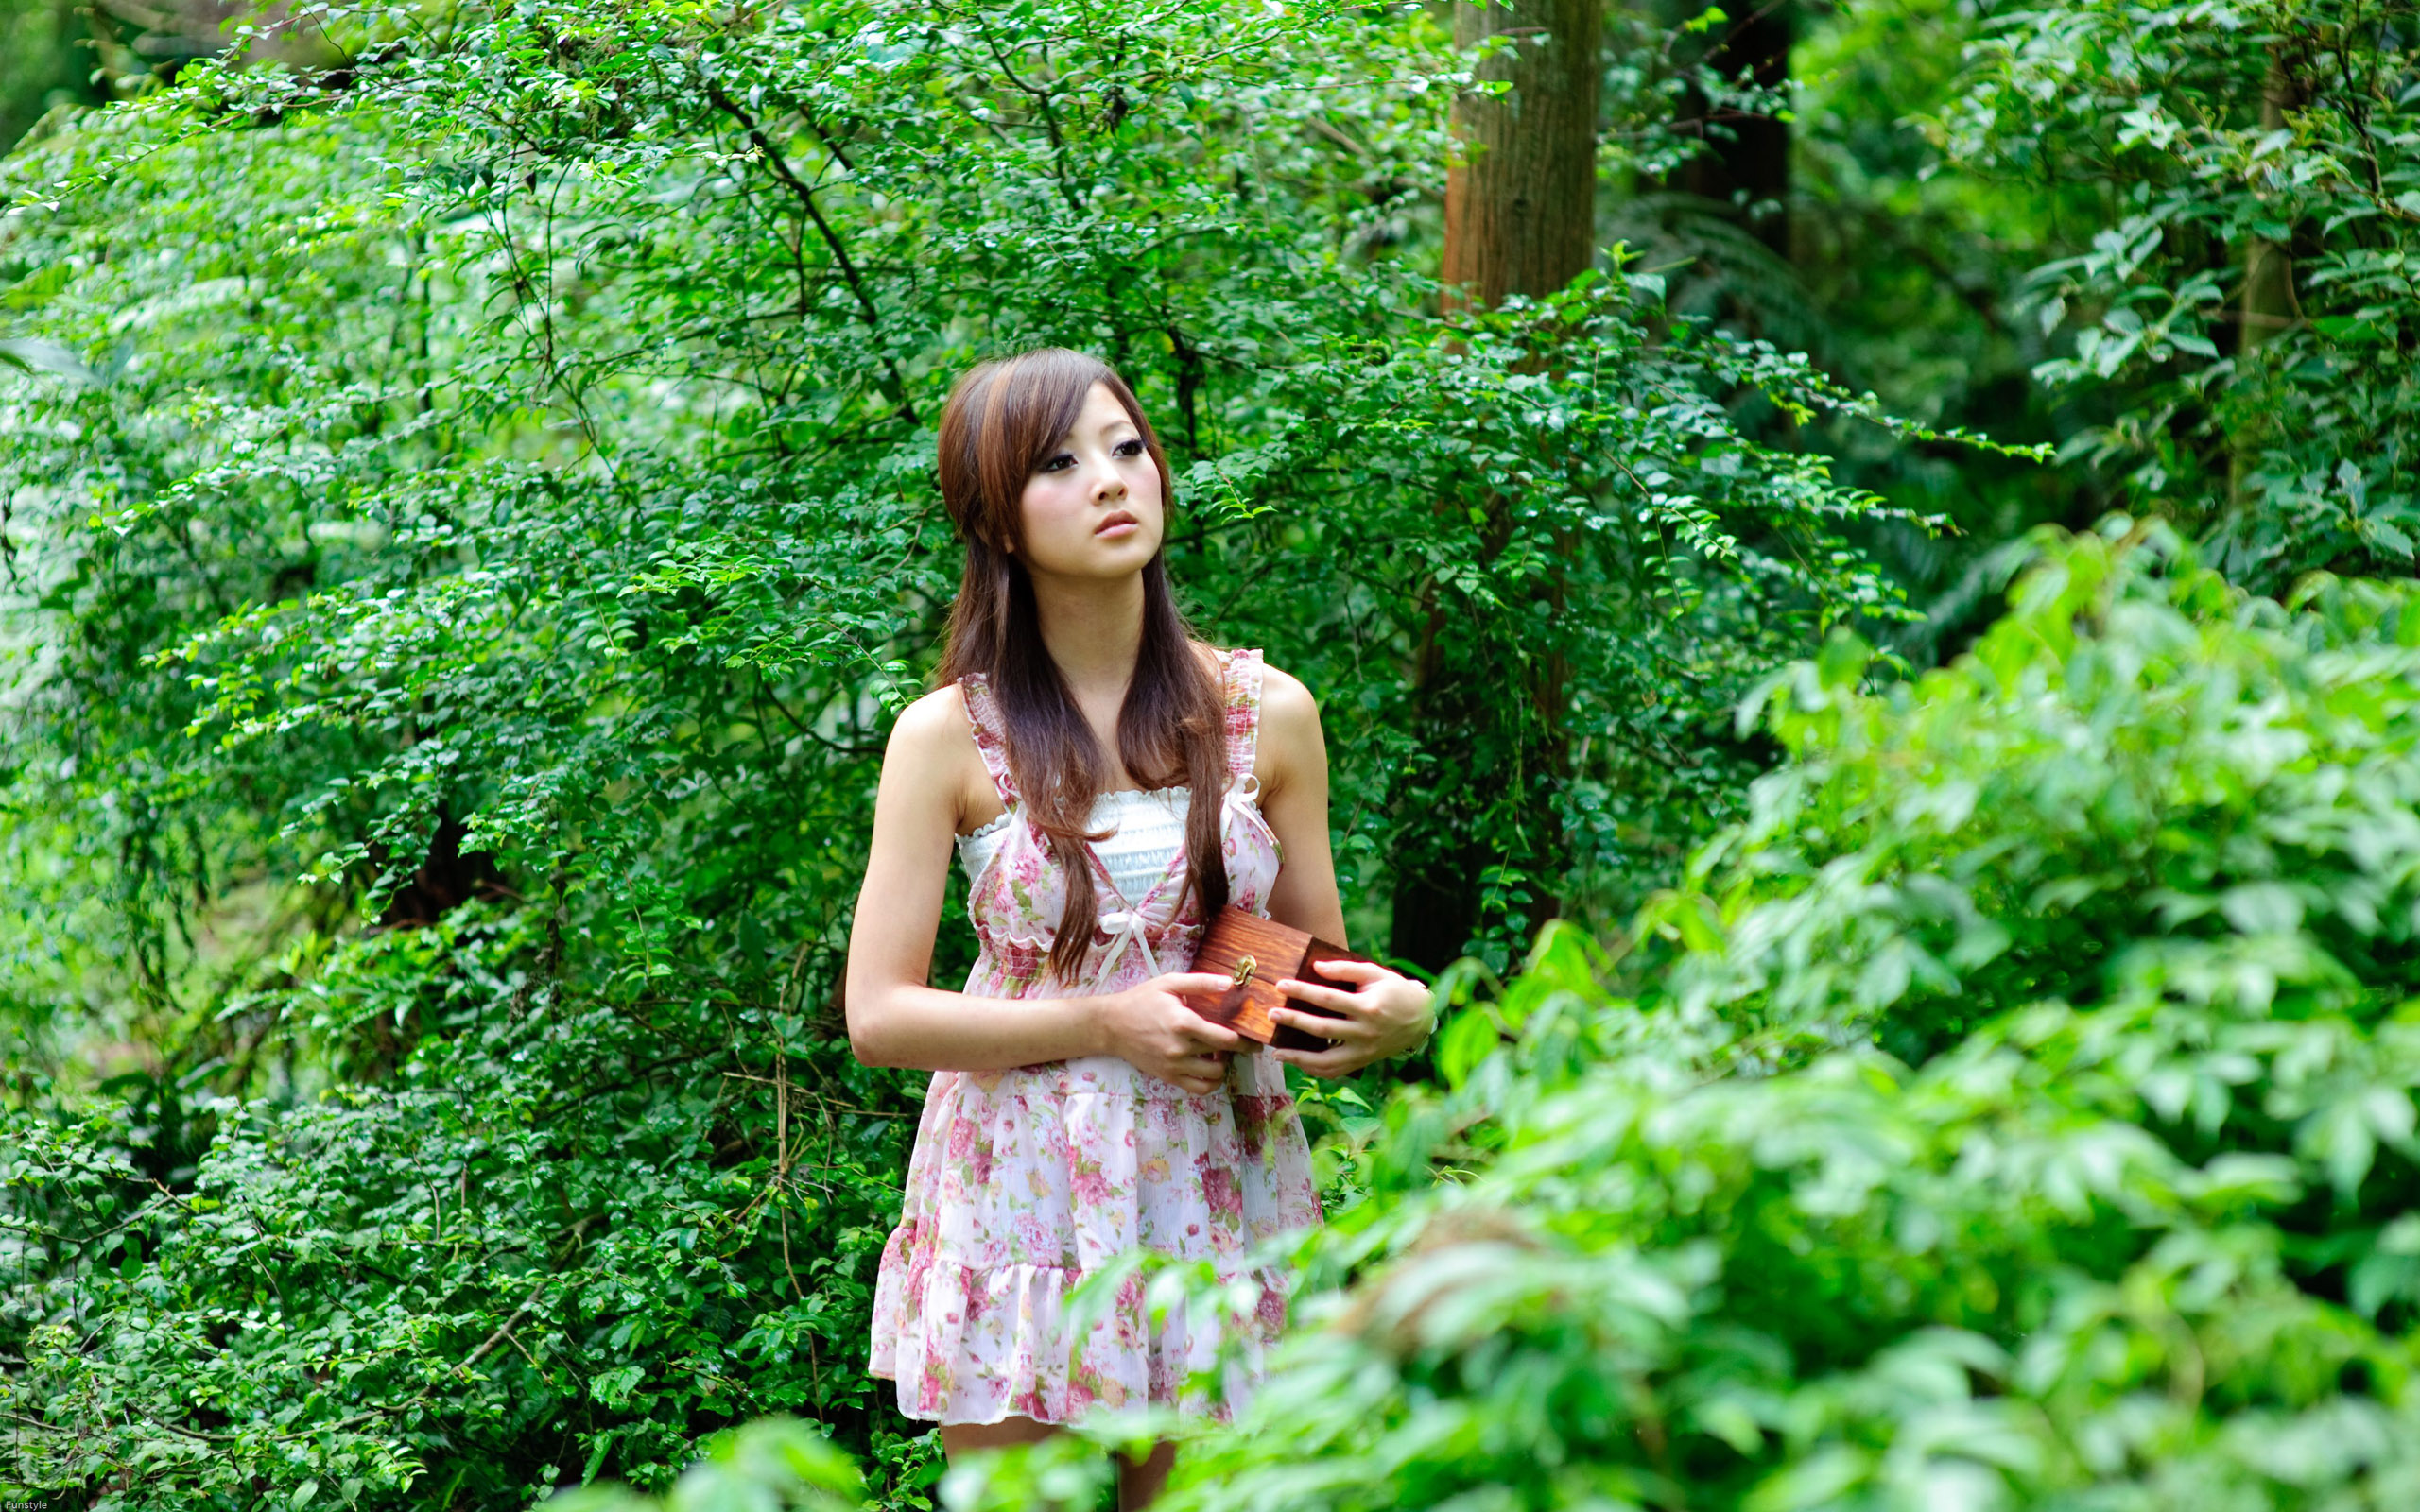 Attractive Introspective Woman in Forest HD Wallpaper